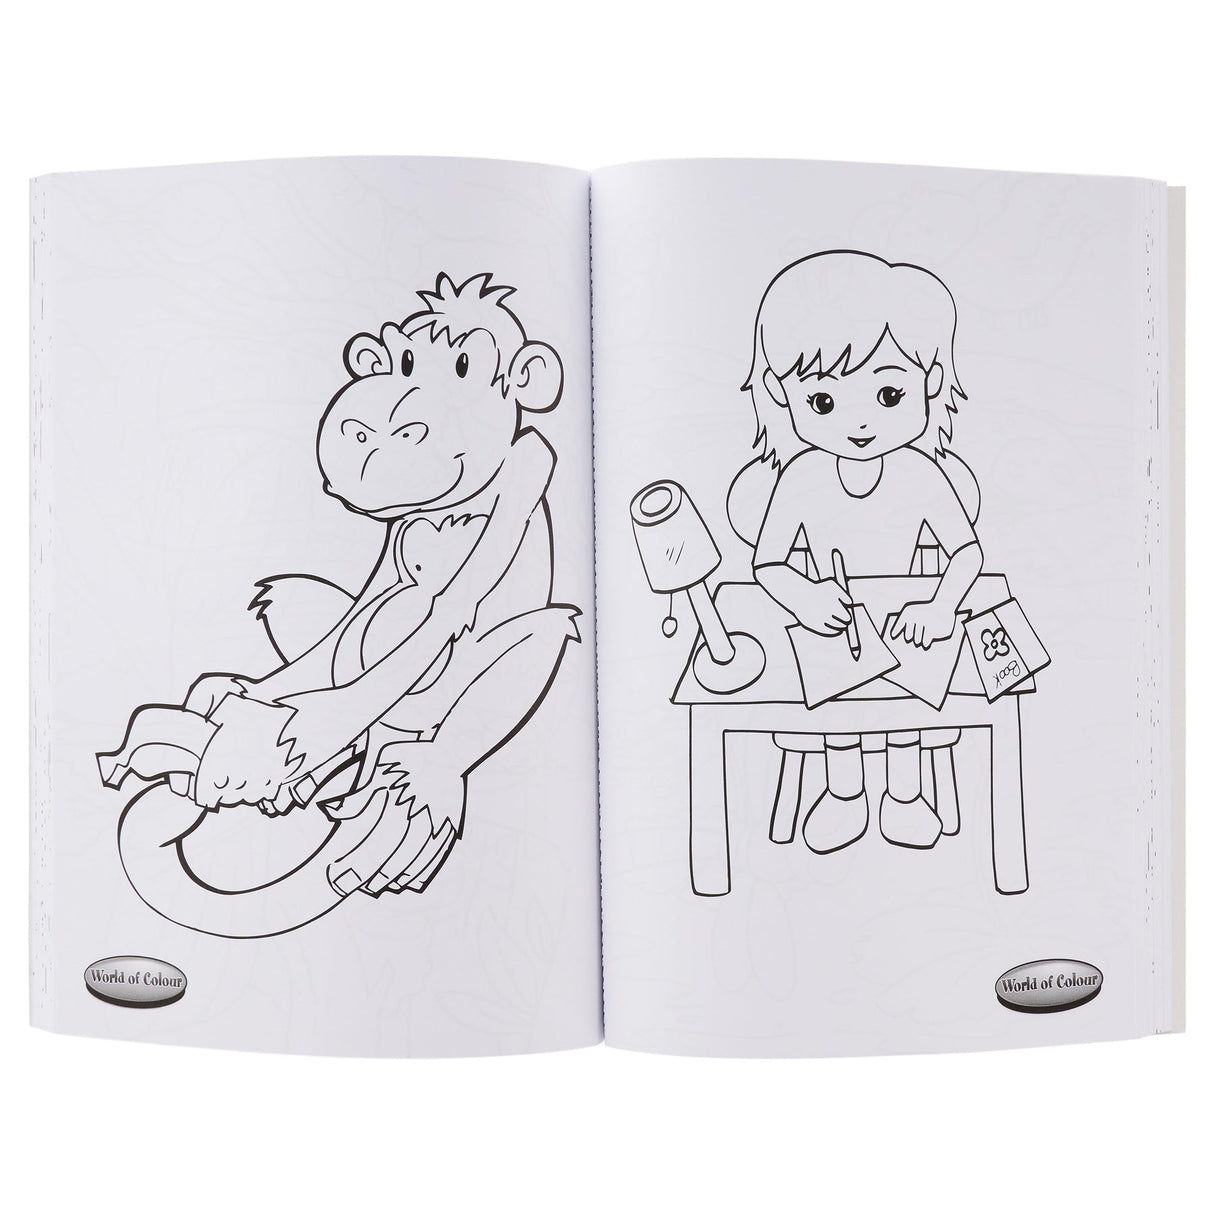 World of Colour A4 Perforated Colour Me Colouring Book - 192 Pages | Stationery Shop UK